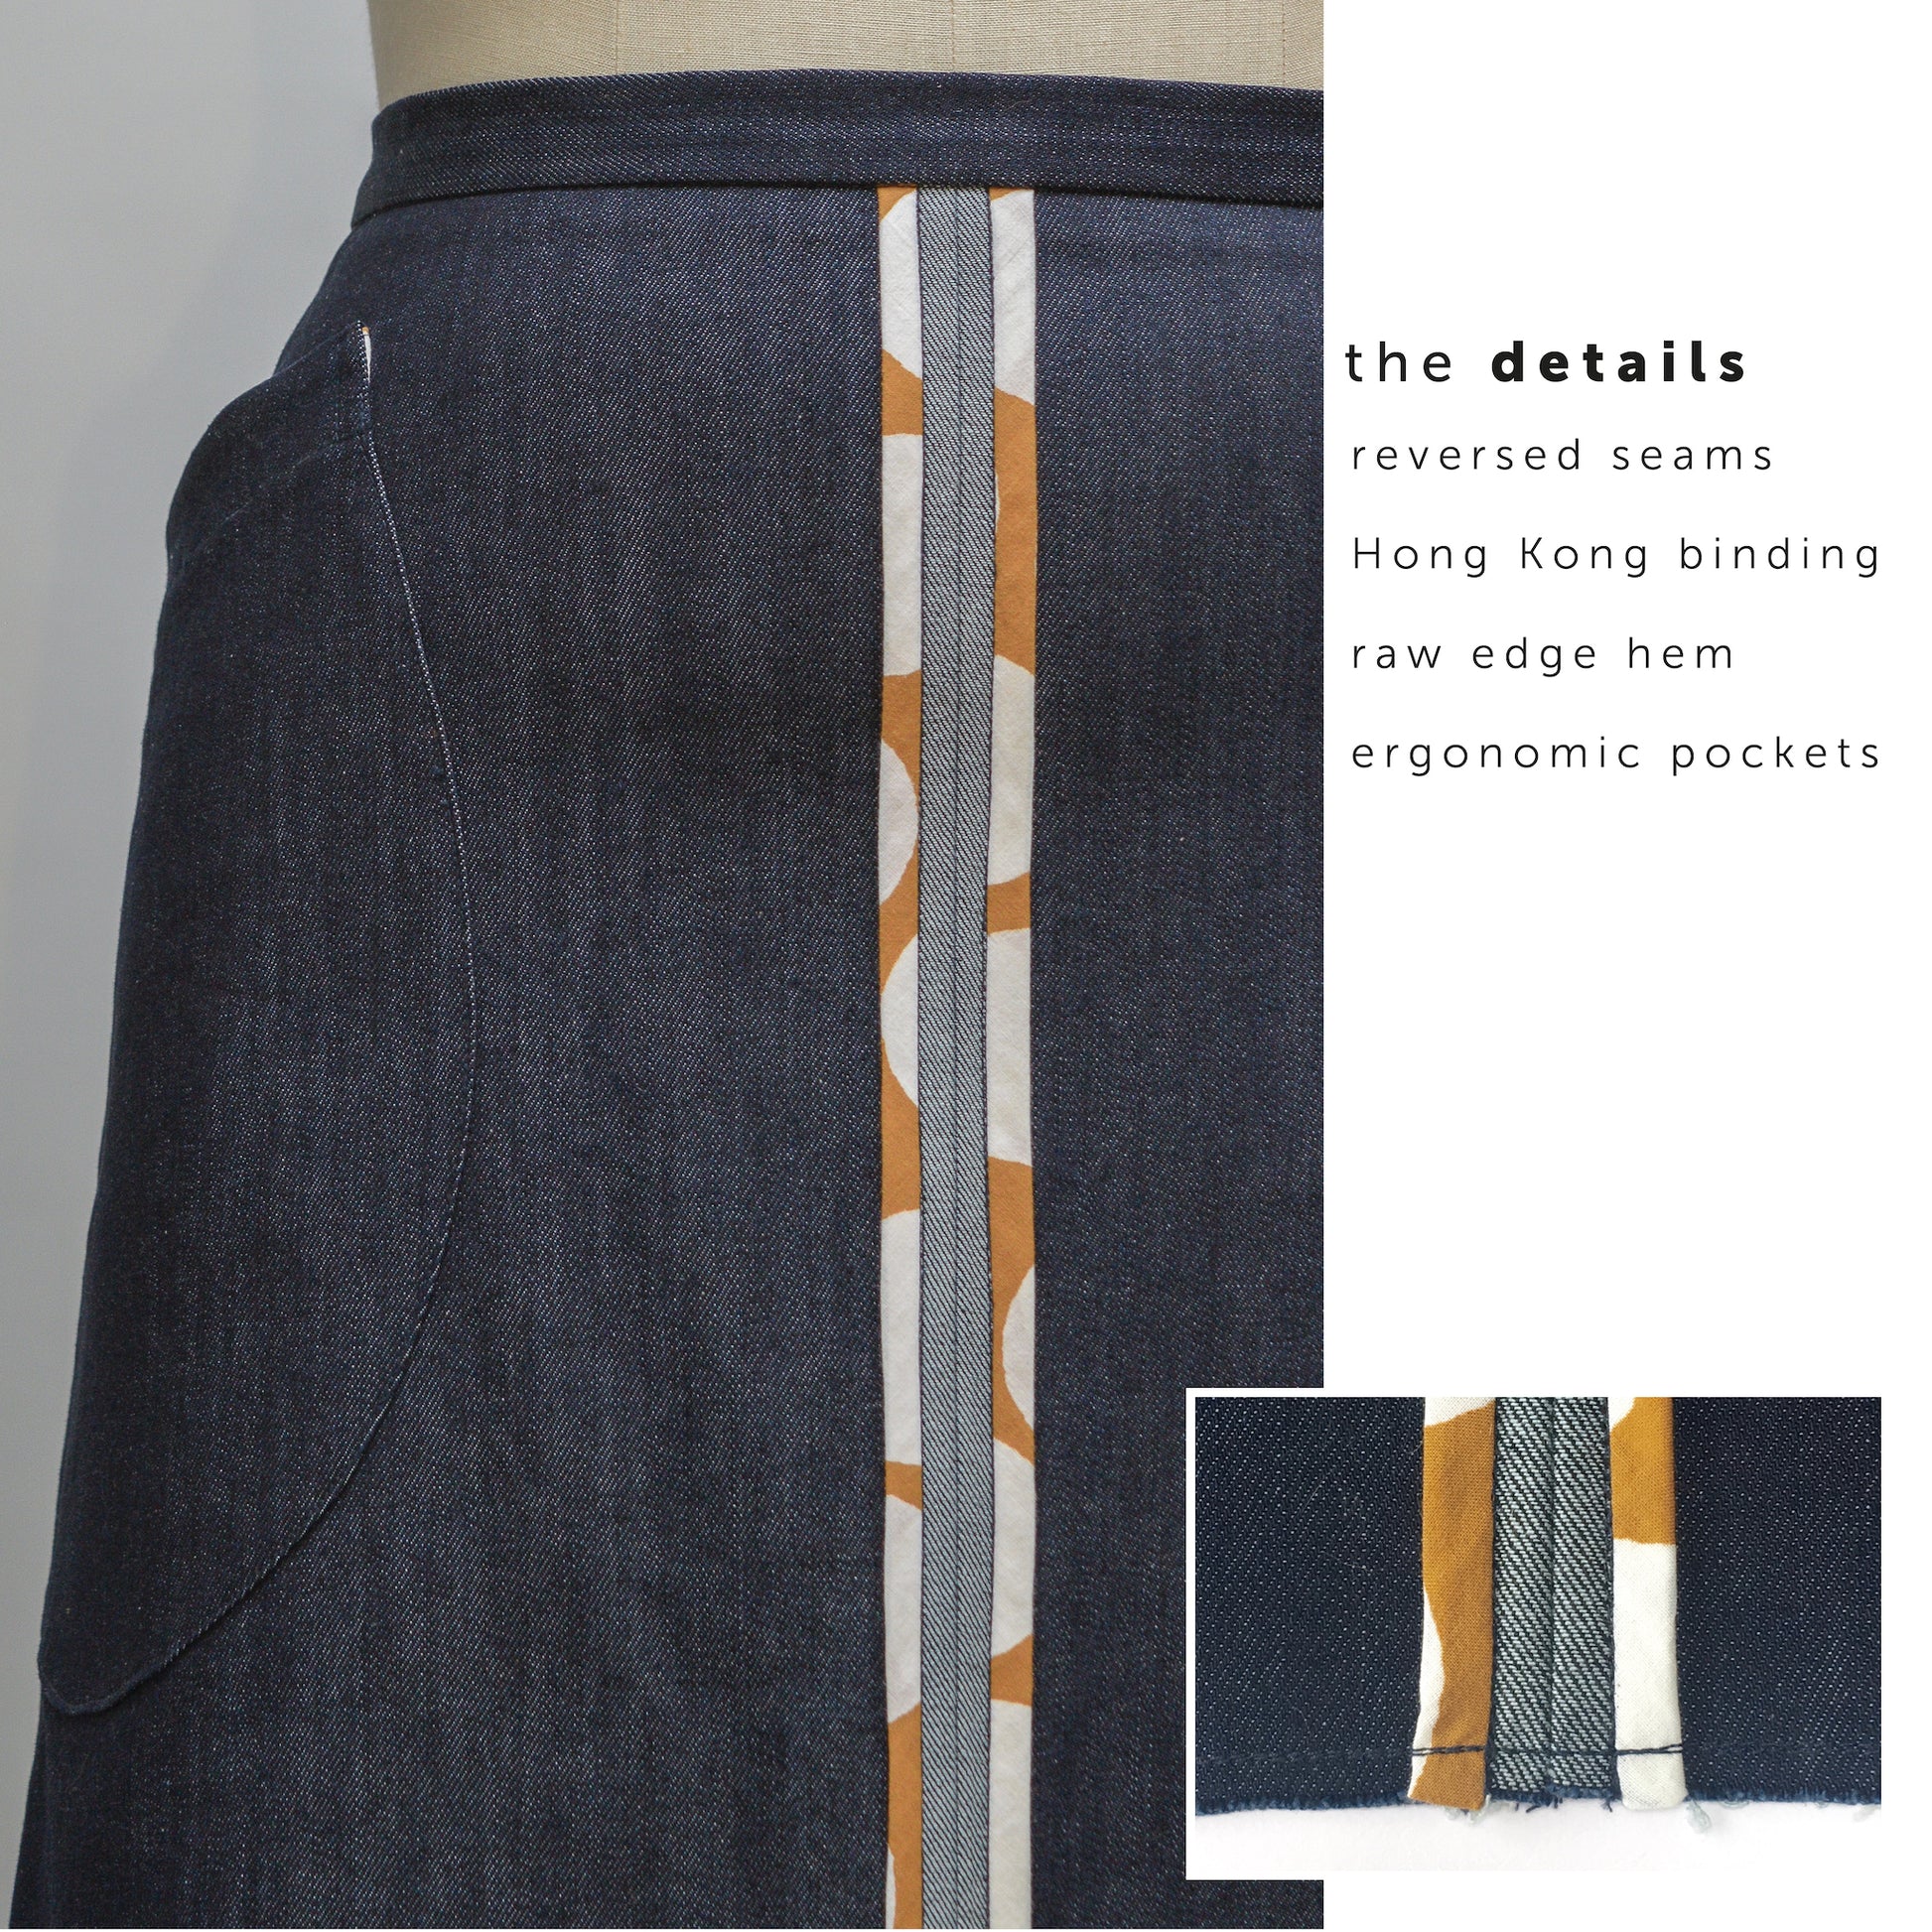 The Good Times Skirt with huge pockets, denim skirt sewing pattern. indie sewing patterns, contemporary and modern sewing patterns made in the UK.